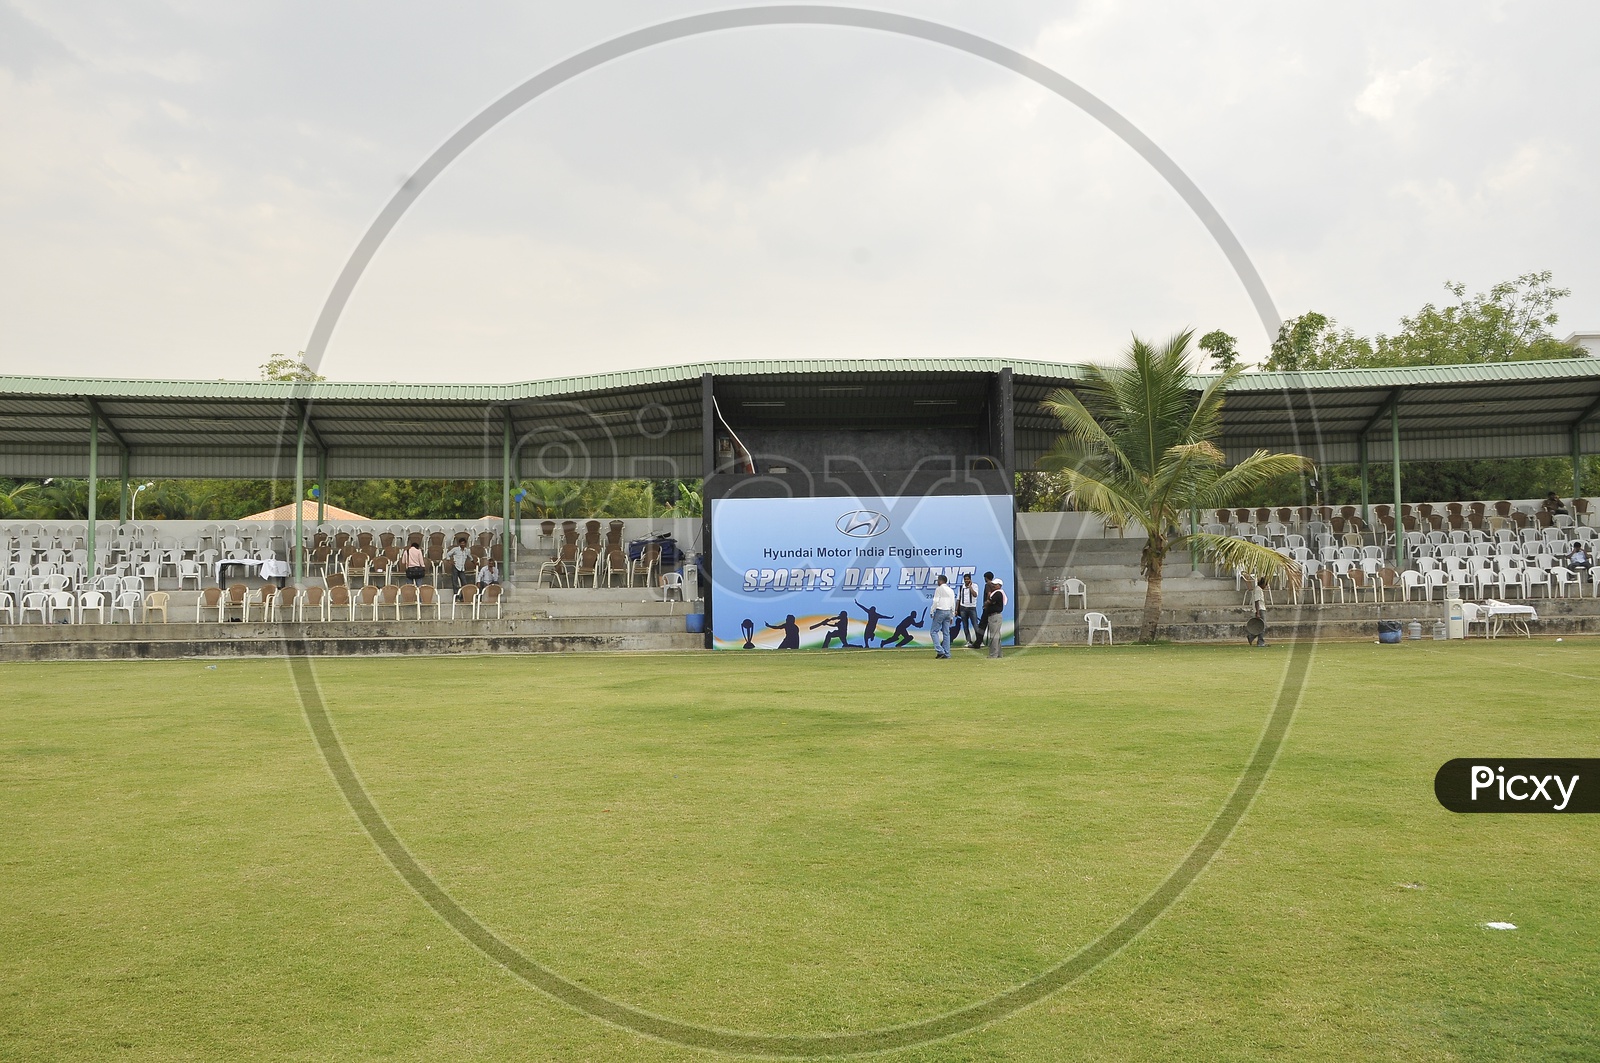 Seating arrangement of audience in a cricket ground